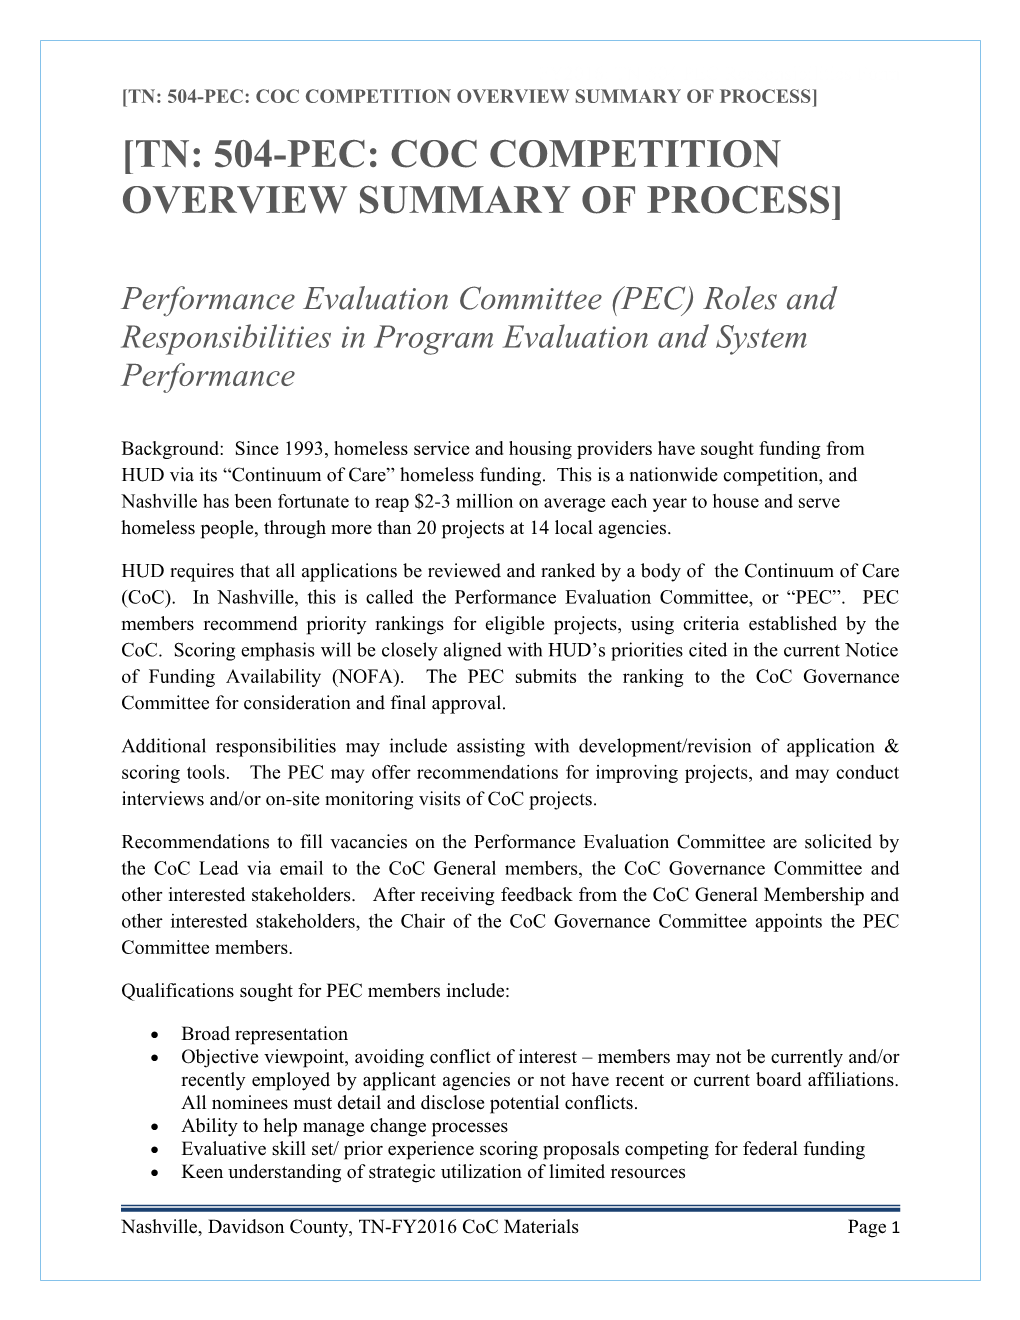 TN: 504-PEC: COC Competition Overview Summary of Process